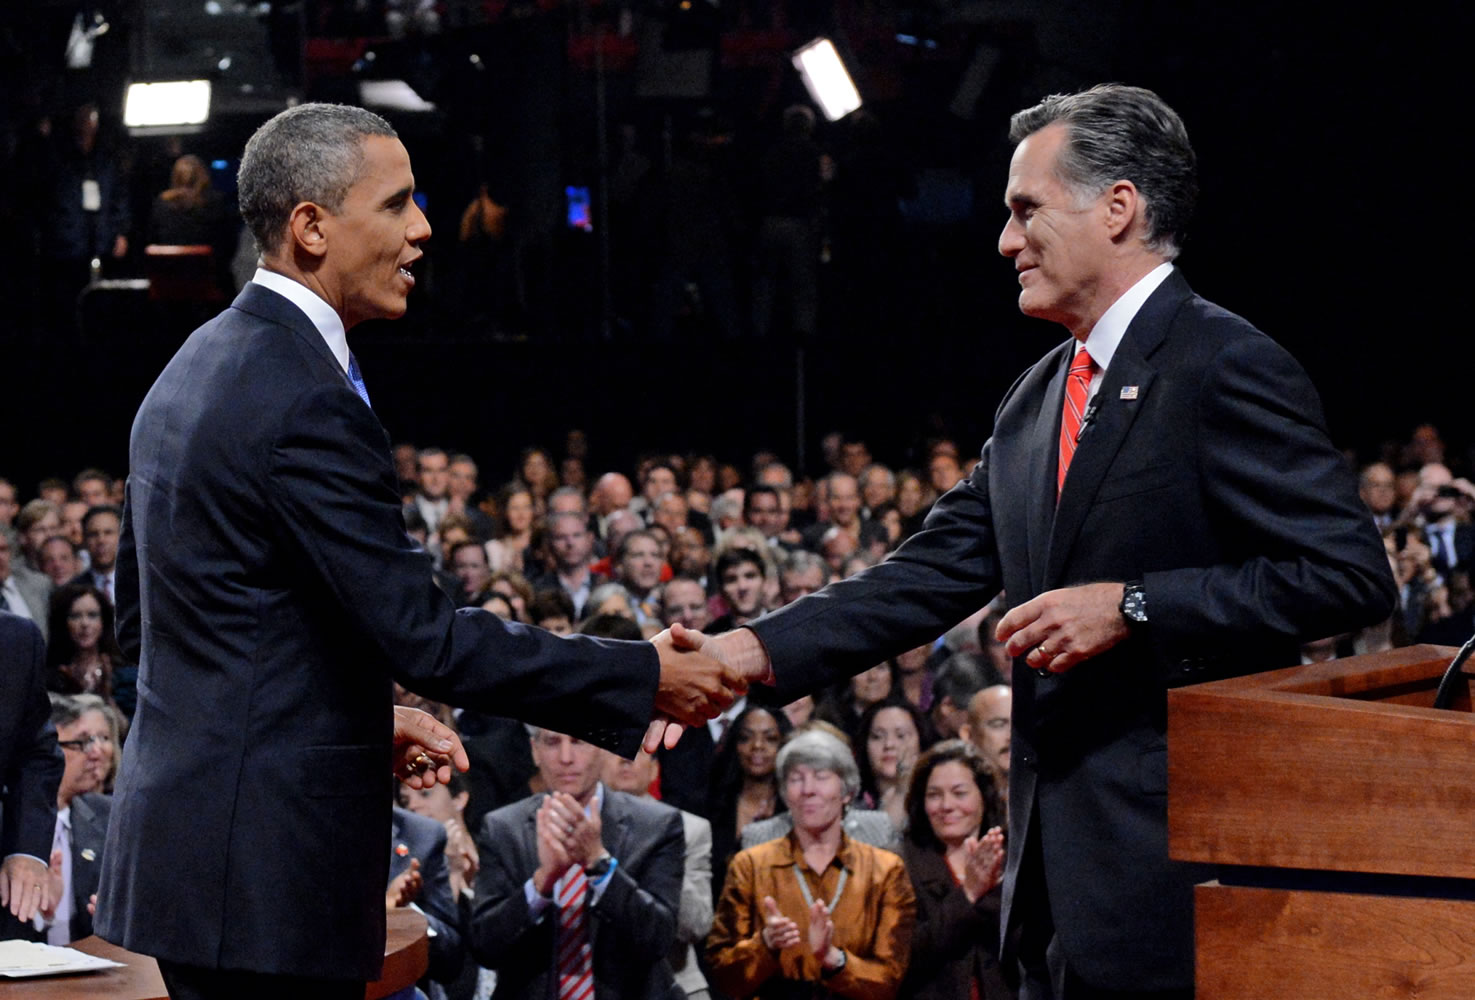 President Barack Obama shakes hands with Republican presidential nominee Mitt Romney after the first presidential debate at the University of Denver, Wednesday in Denver.